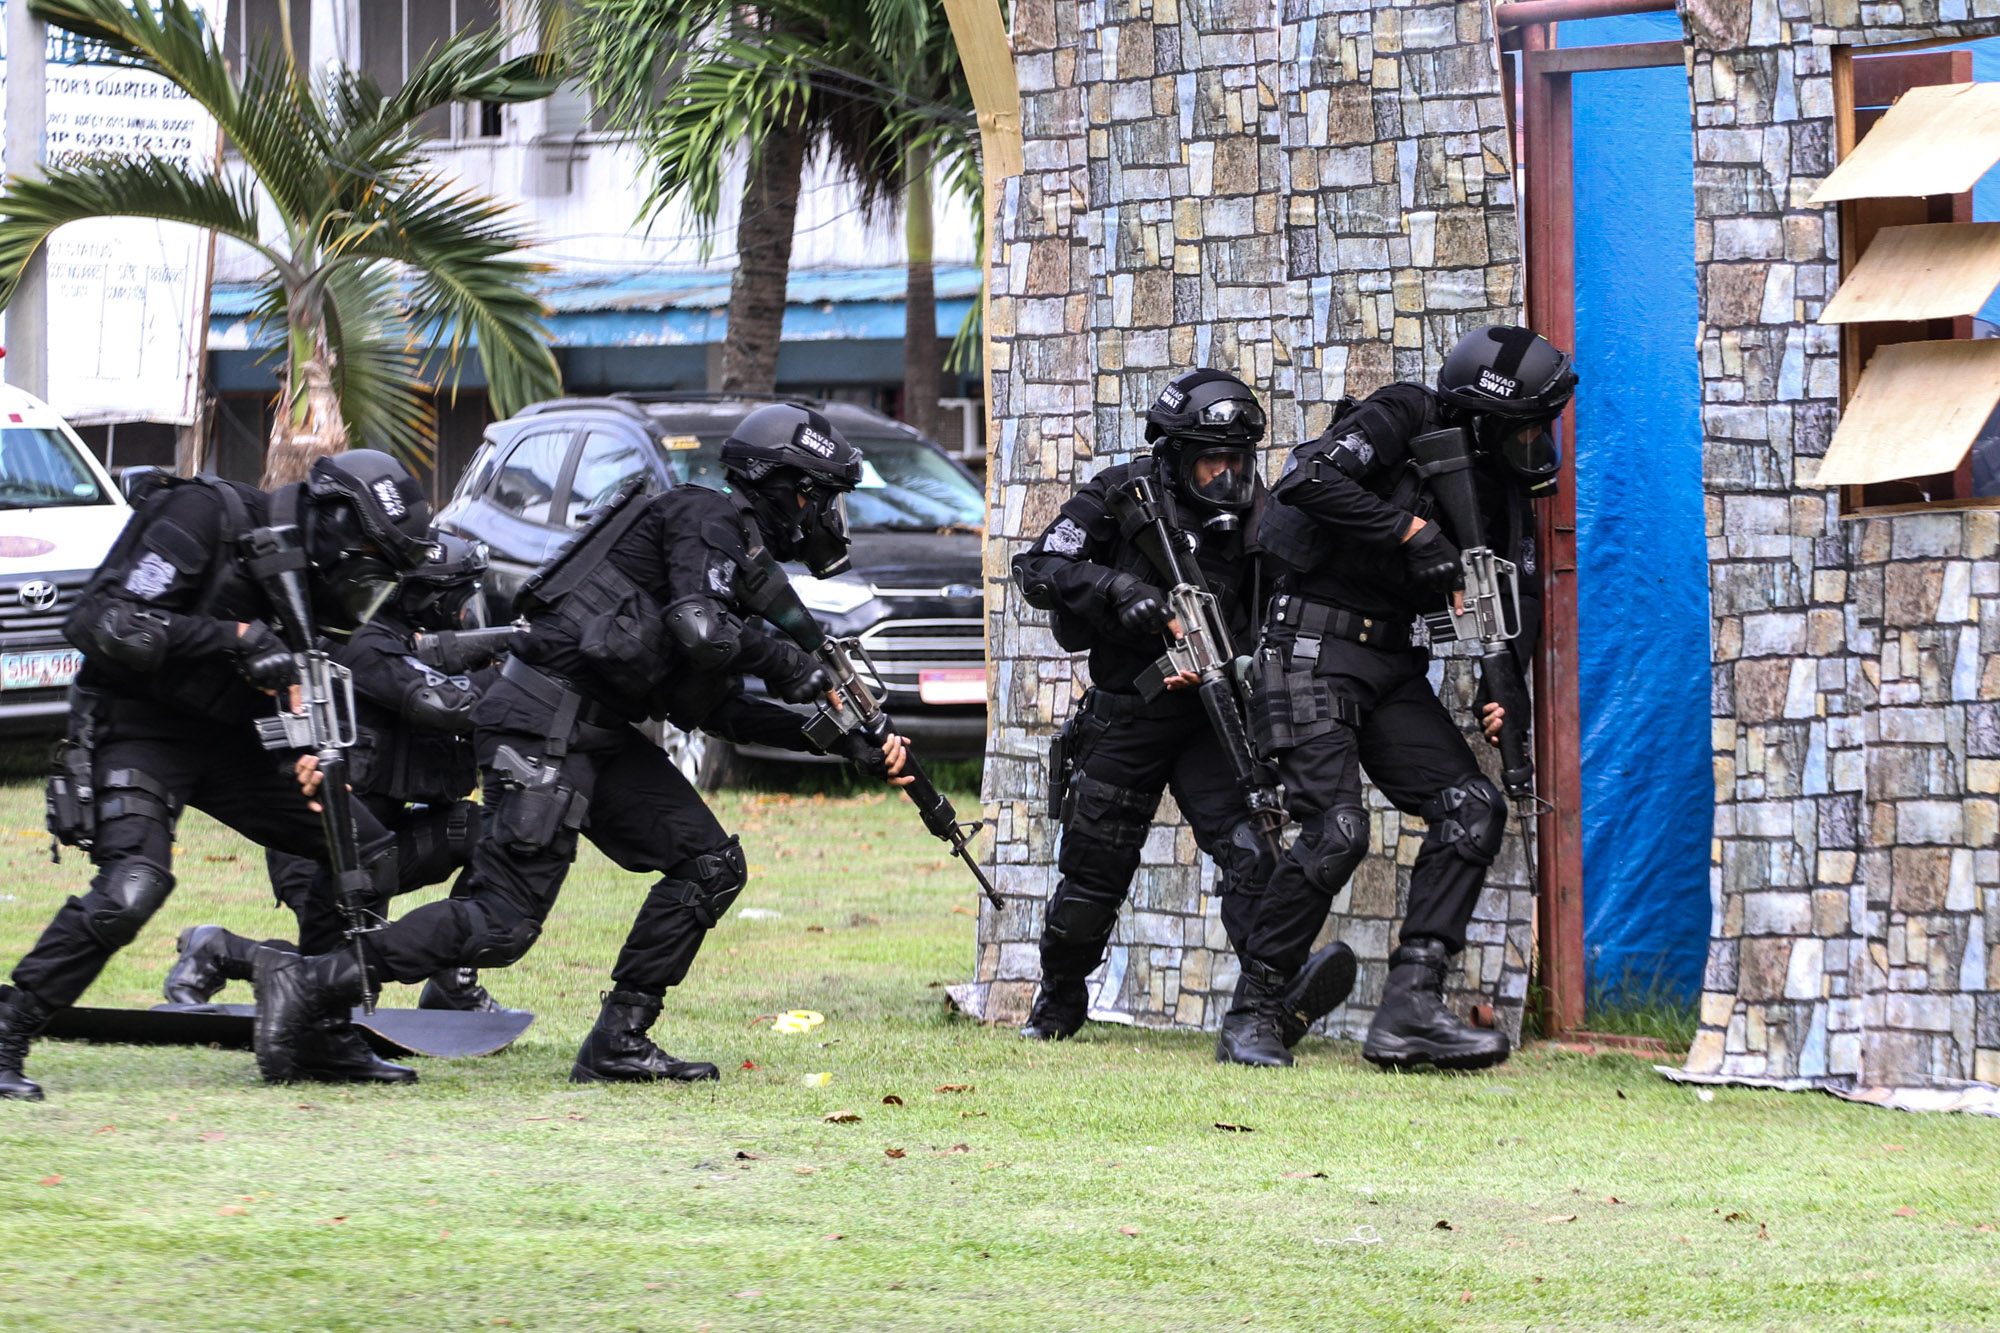 COMBAT-READY. SWAT members enter a simulation room, demonstrating their close quarters combat capability.  